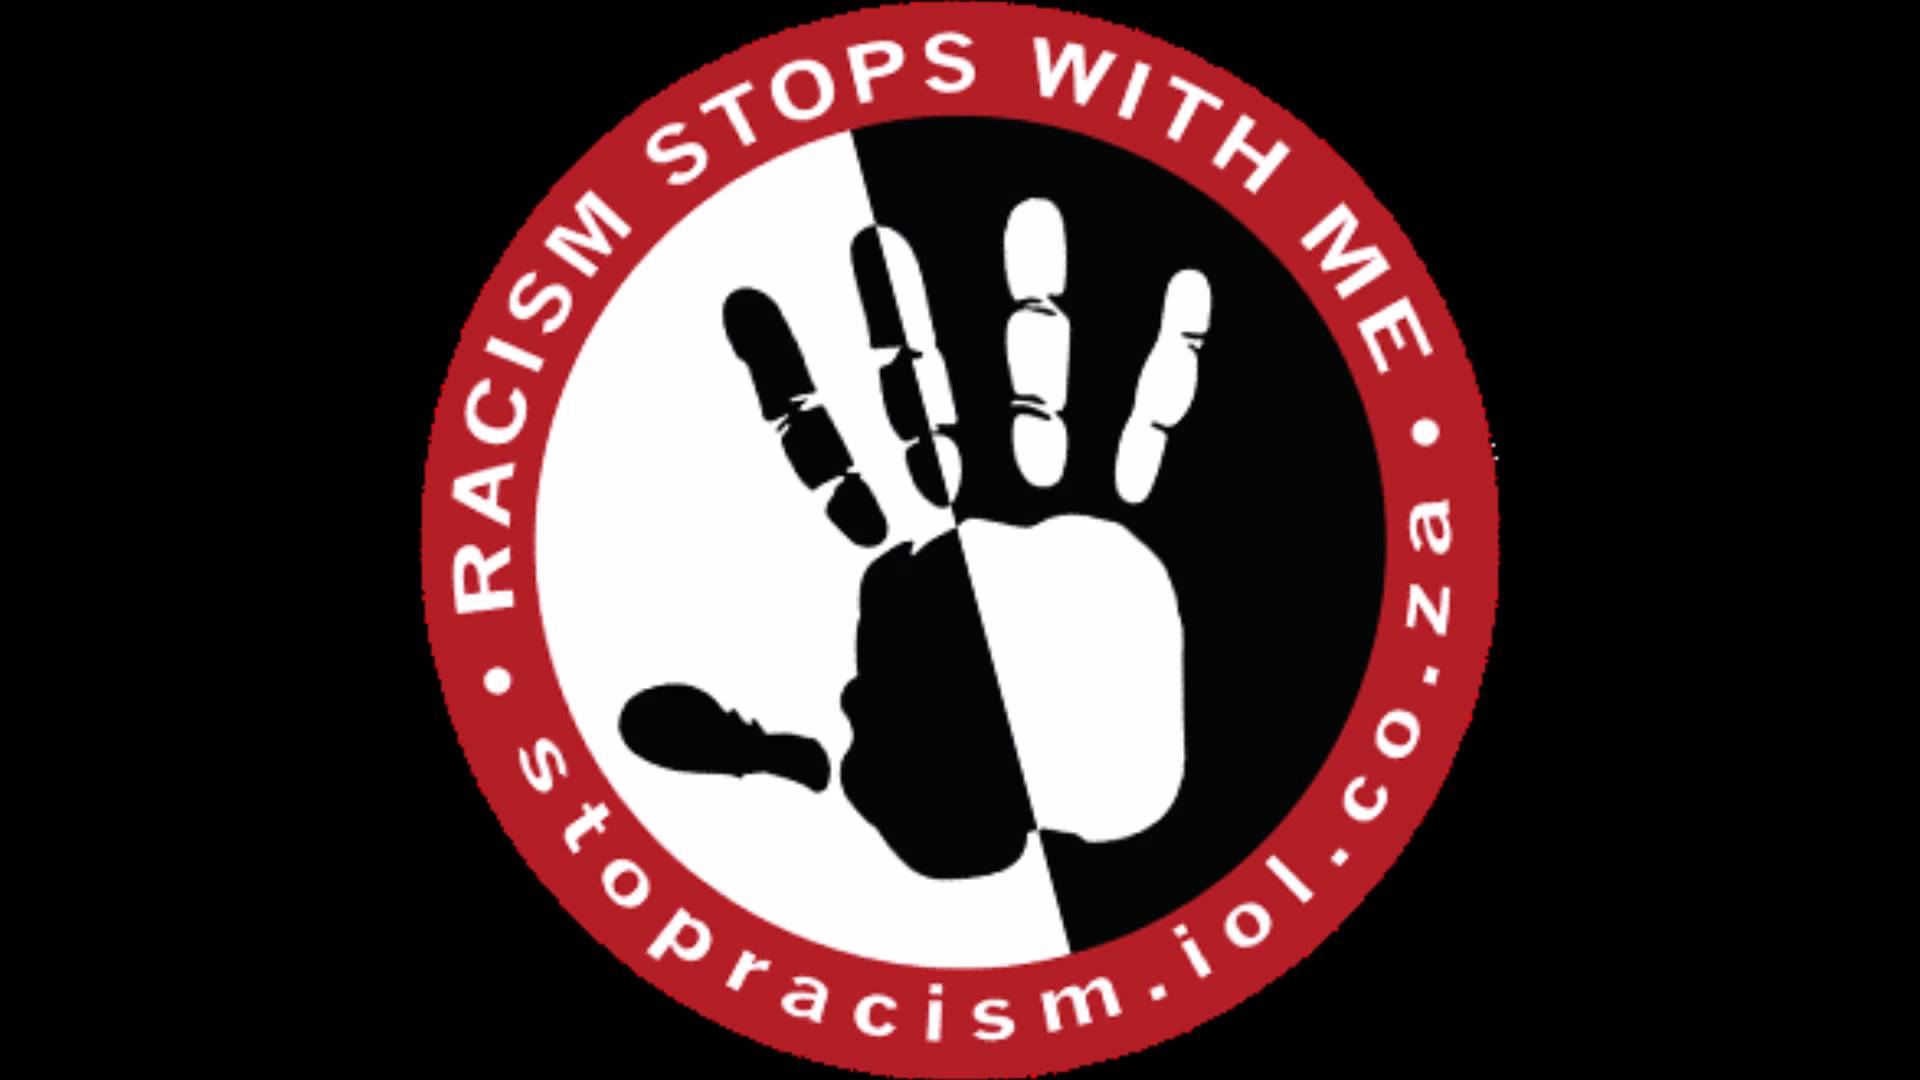 Racism Stops With Me (Radio Ad)